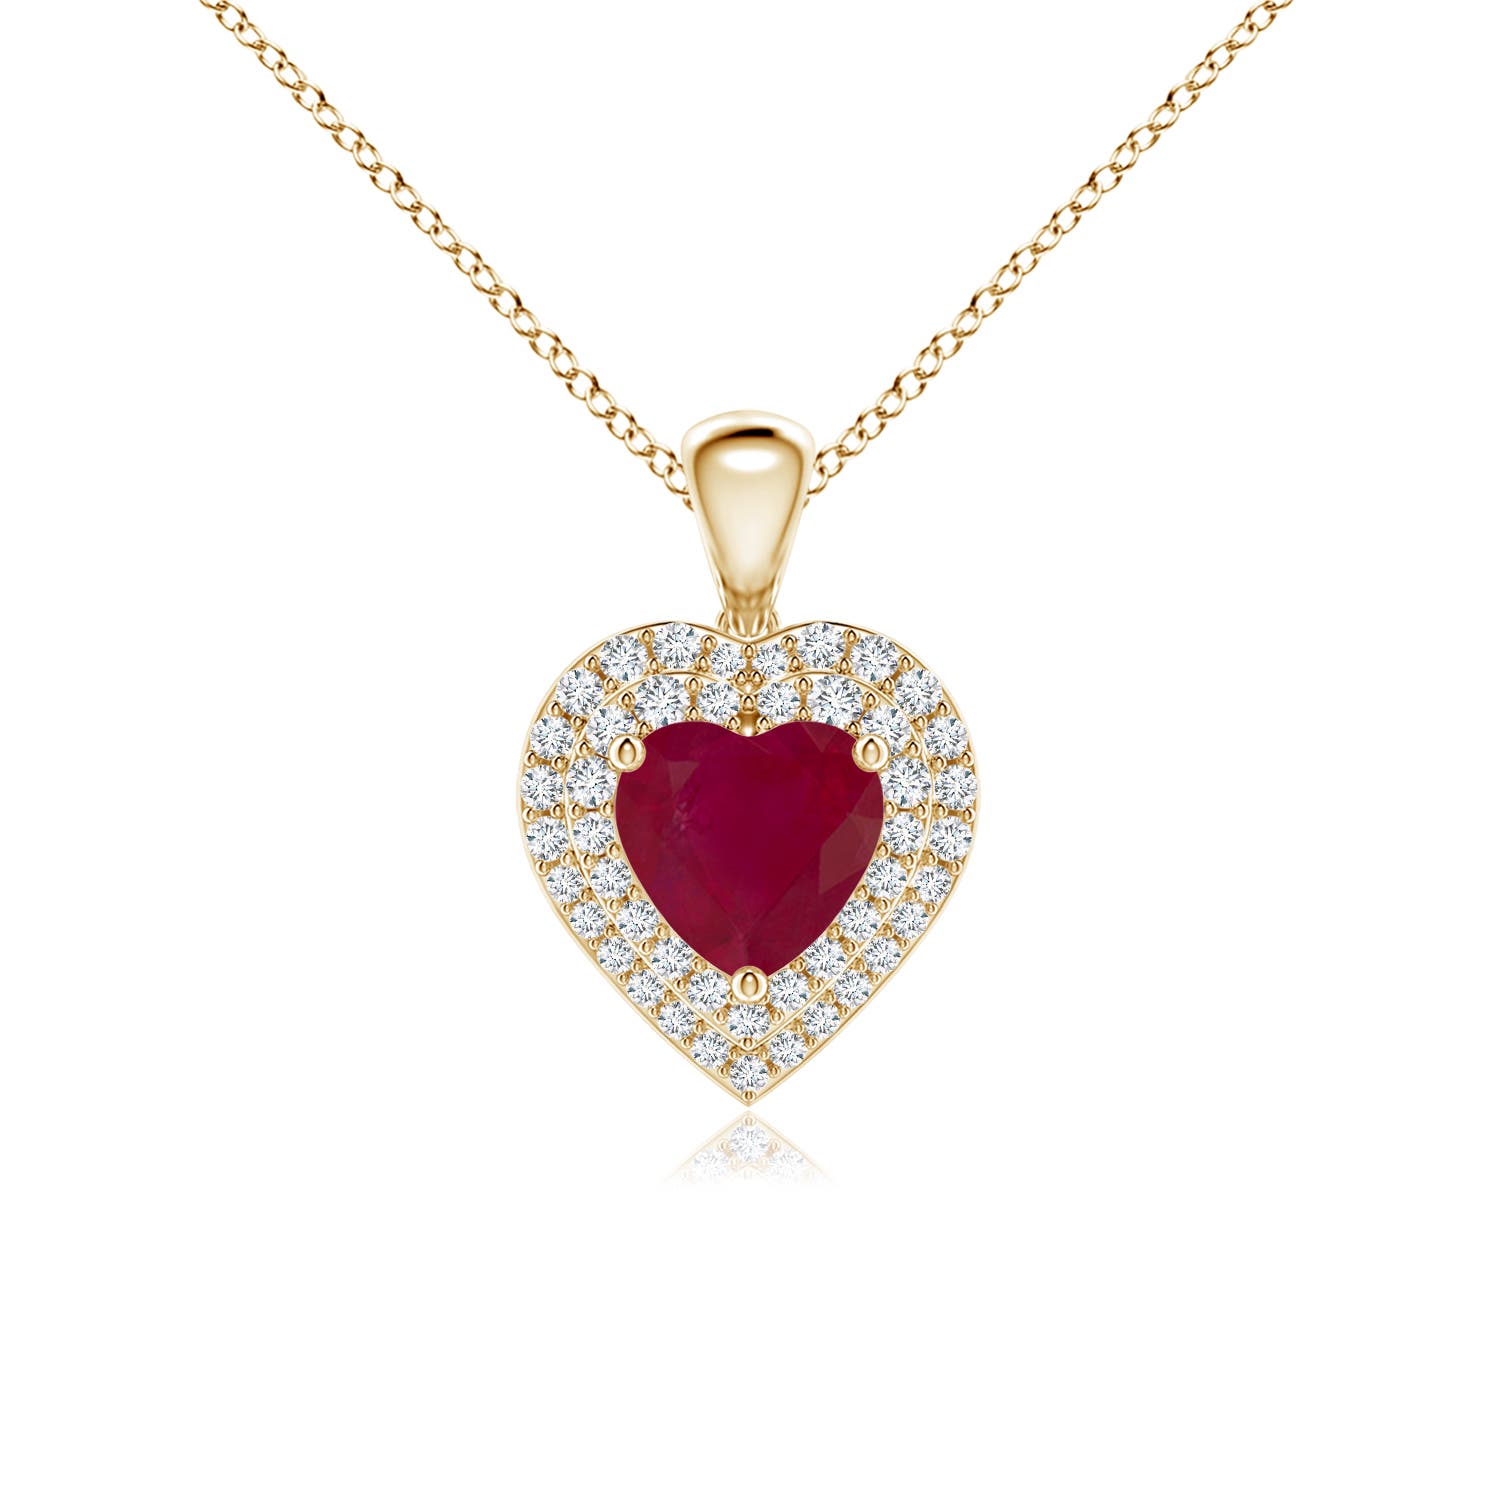 A - Ruby / 1.25 CT / 14 KT Yellow Gold